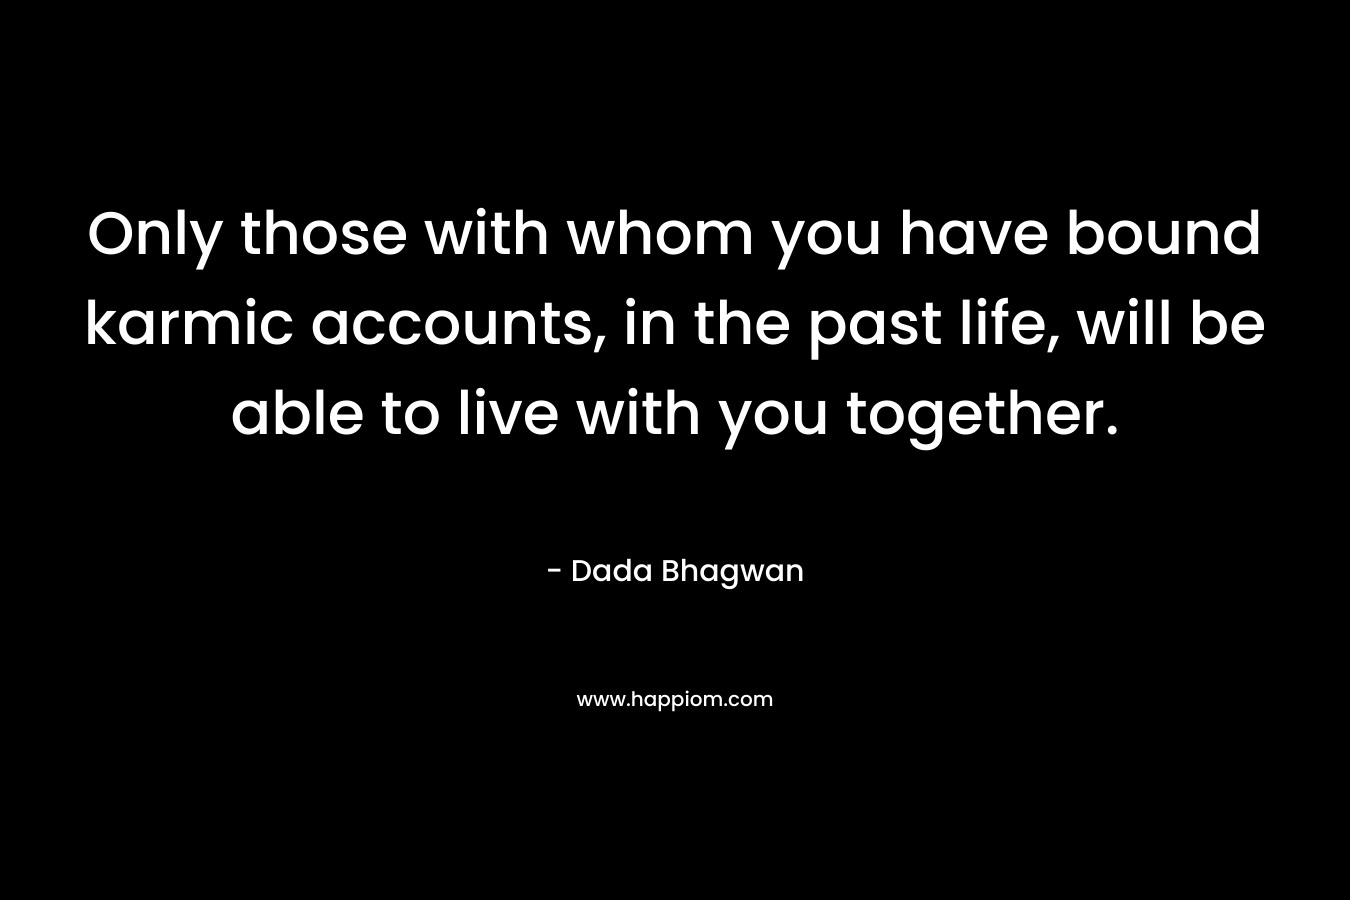 Only those with whom you have bound karmic accounts, in the past life, will be able to live with you together.